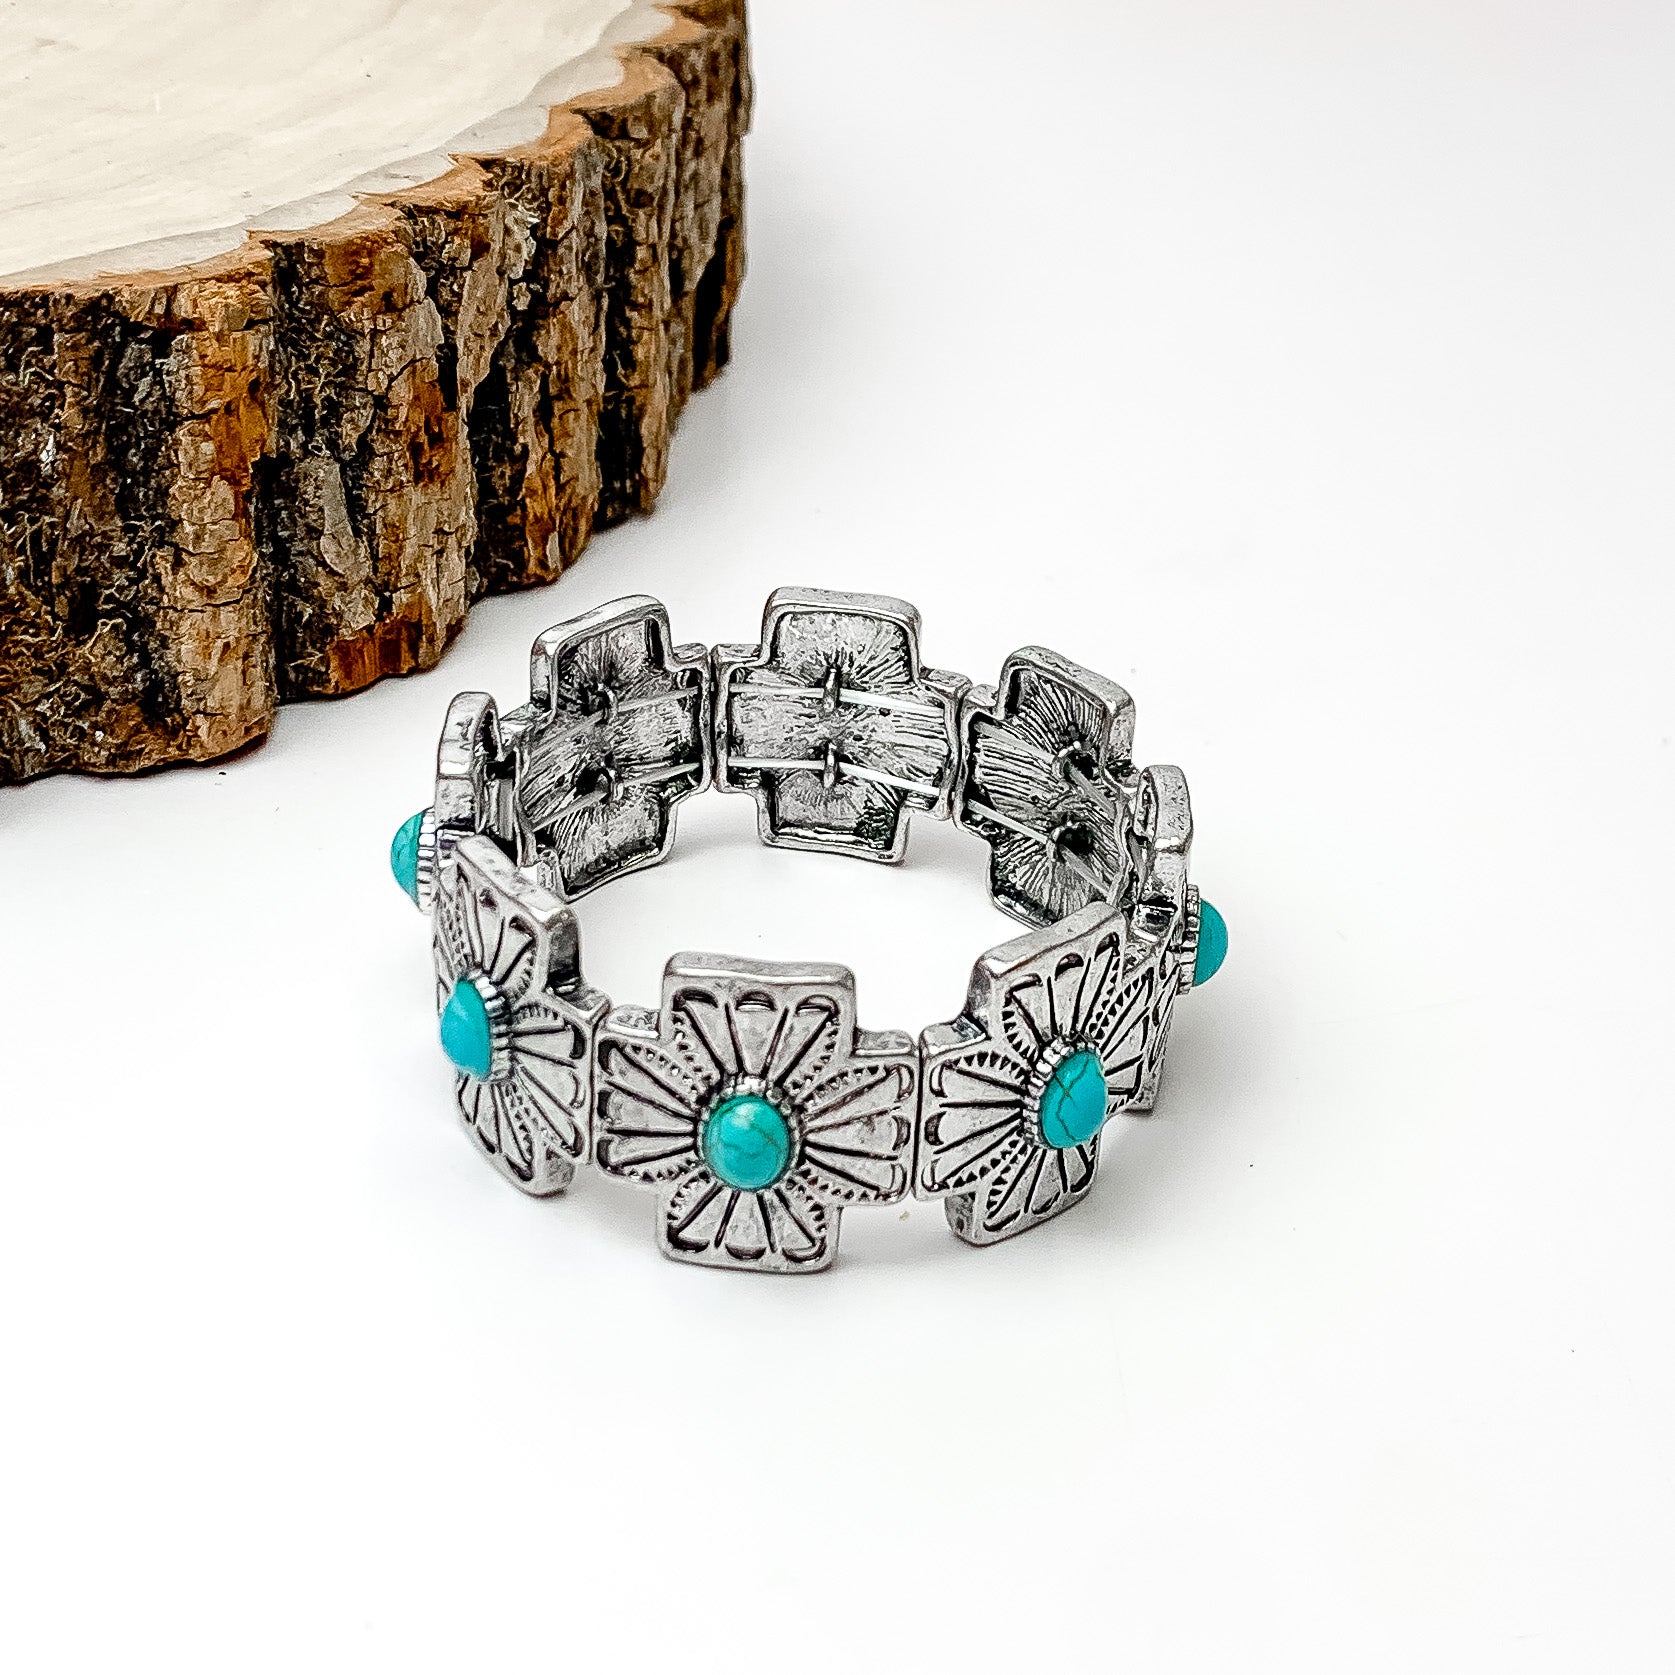 Pictured is a silver cross bracelet with engraved details and center turquoise stones. This bracelet is pictured on a white background with a piece of wood in the top left corner. 